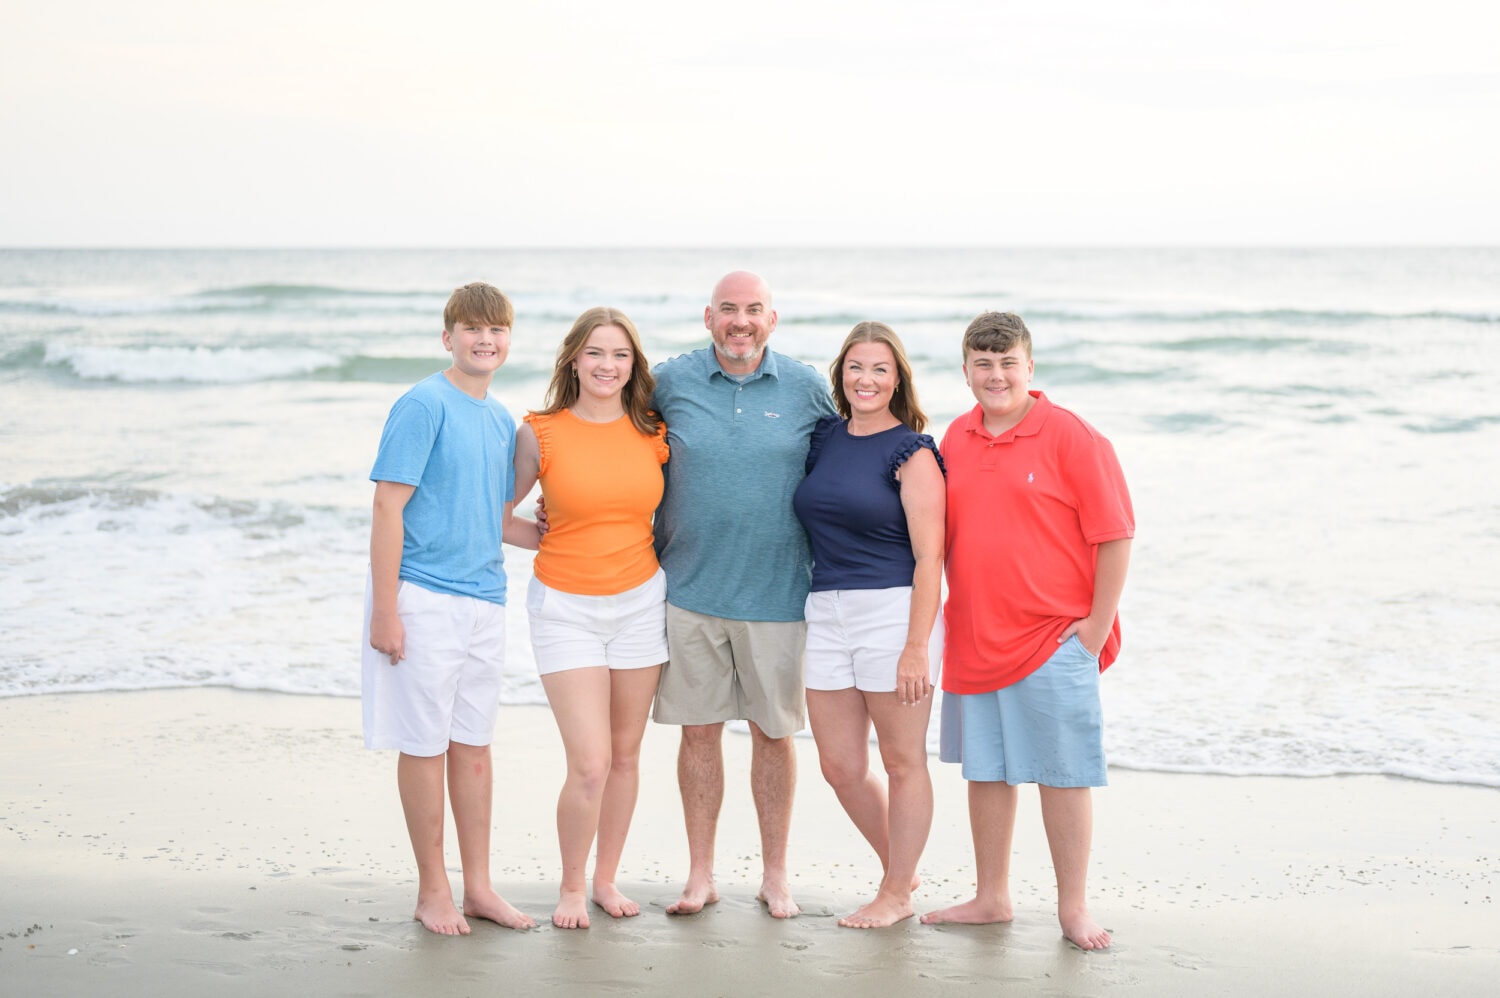 Family with colorful outfits having fun on the beach - Huntington Beach State Park